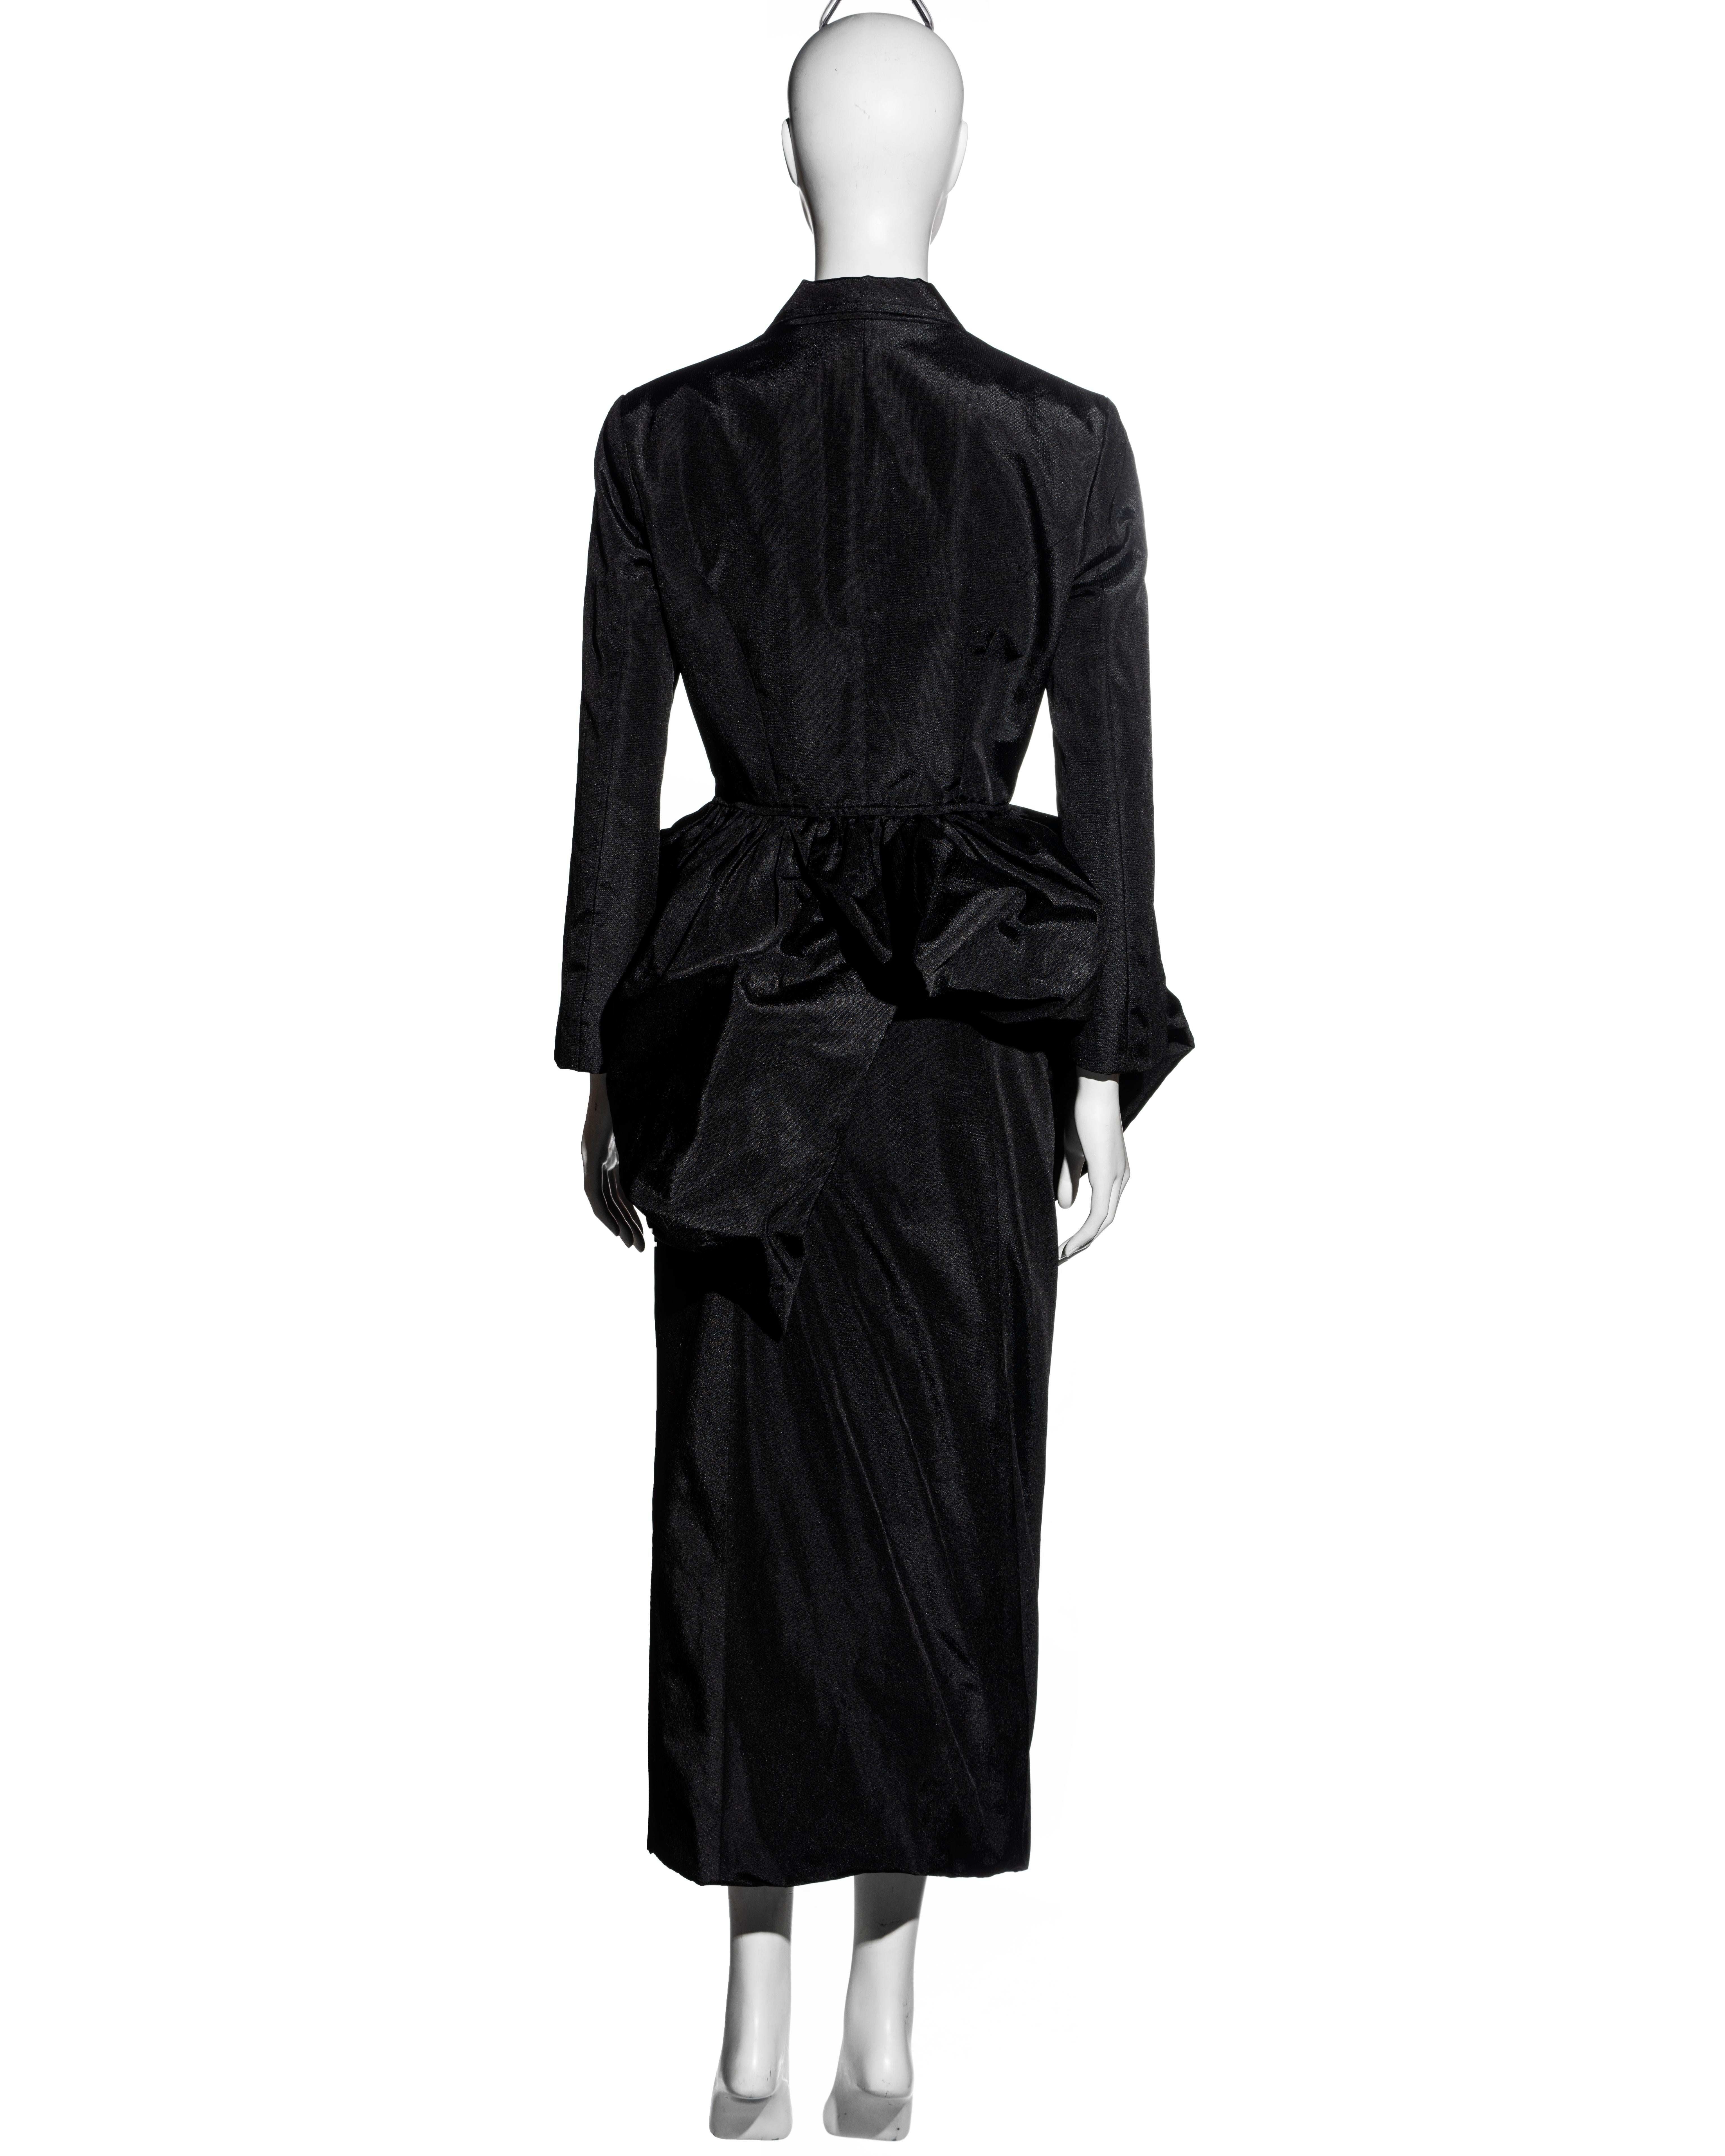 Comme des Garcons black synthetic bustled jacket and skirt suit, fw 1986 7